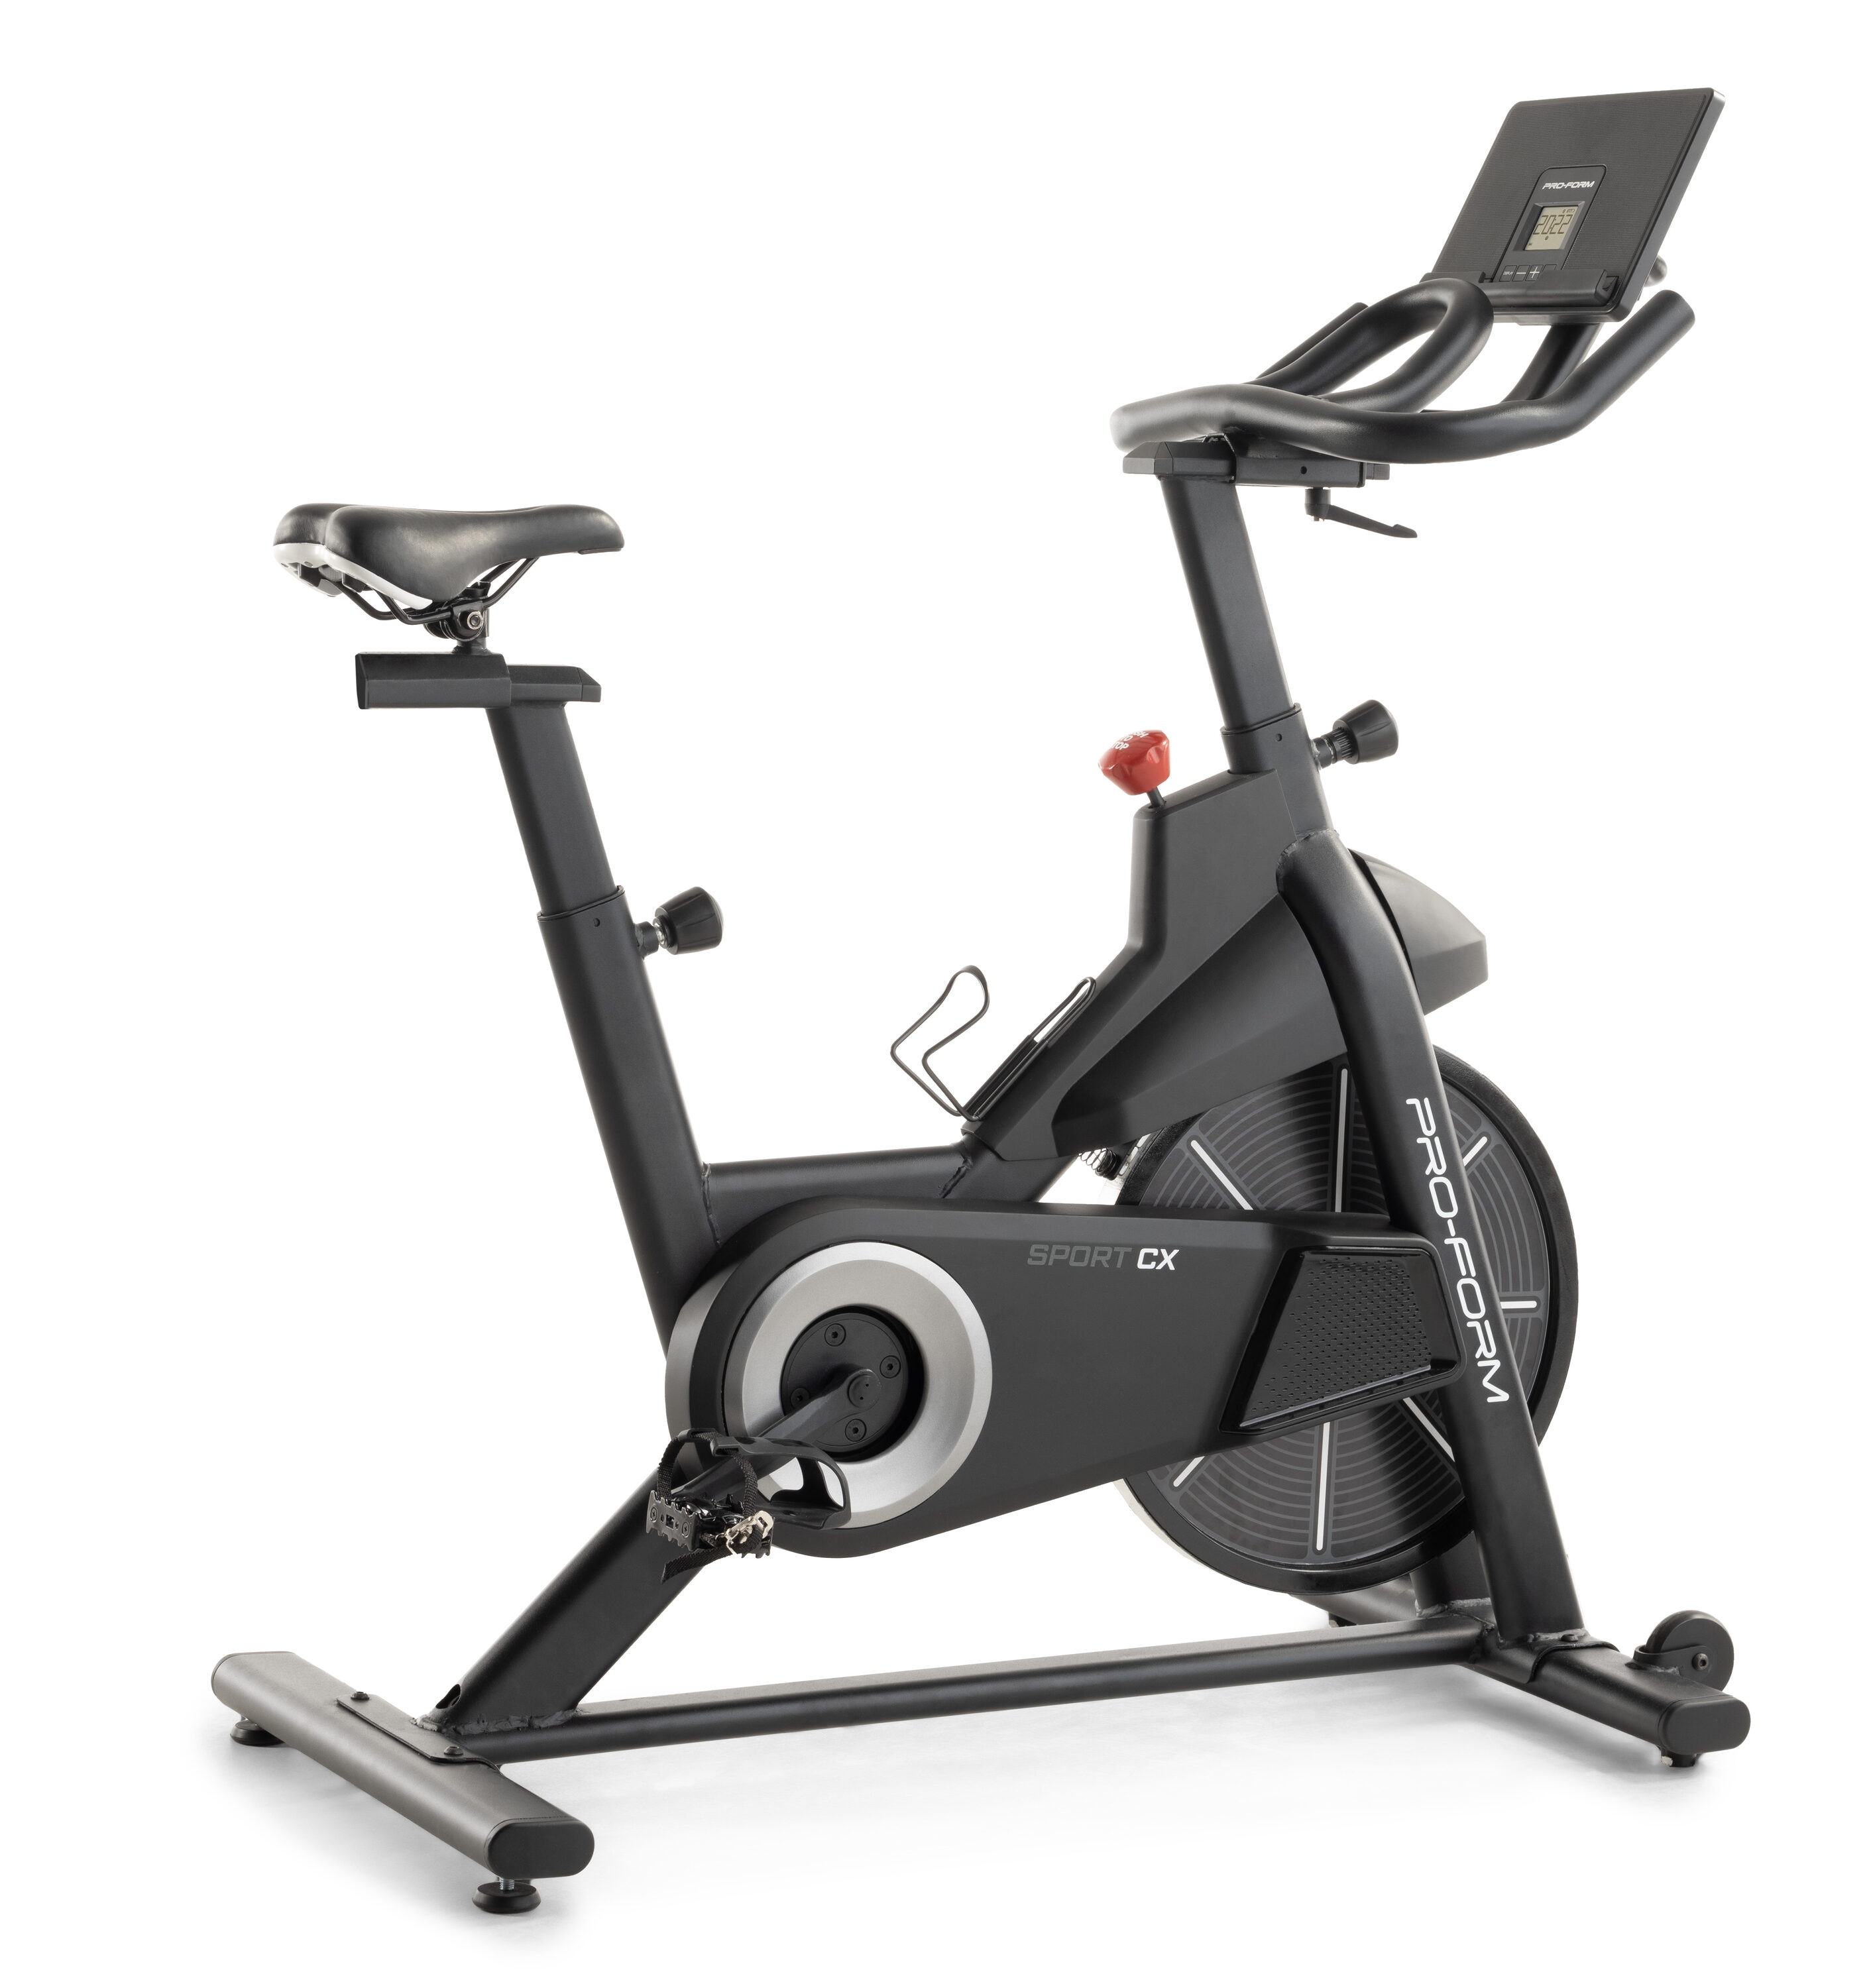 ProForm Exercise Bikes at Lowes.com